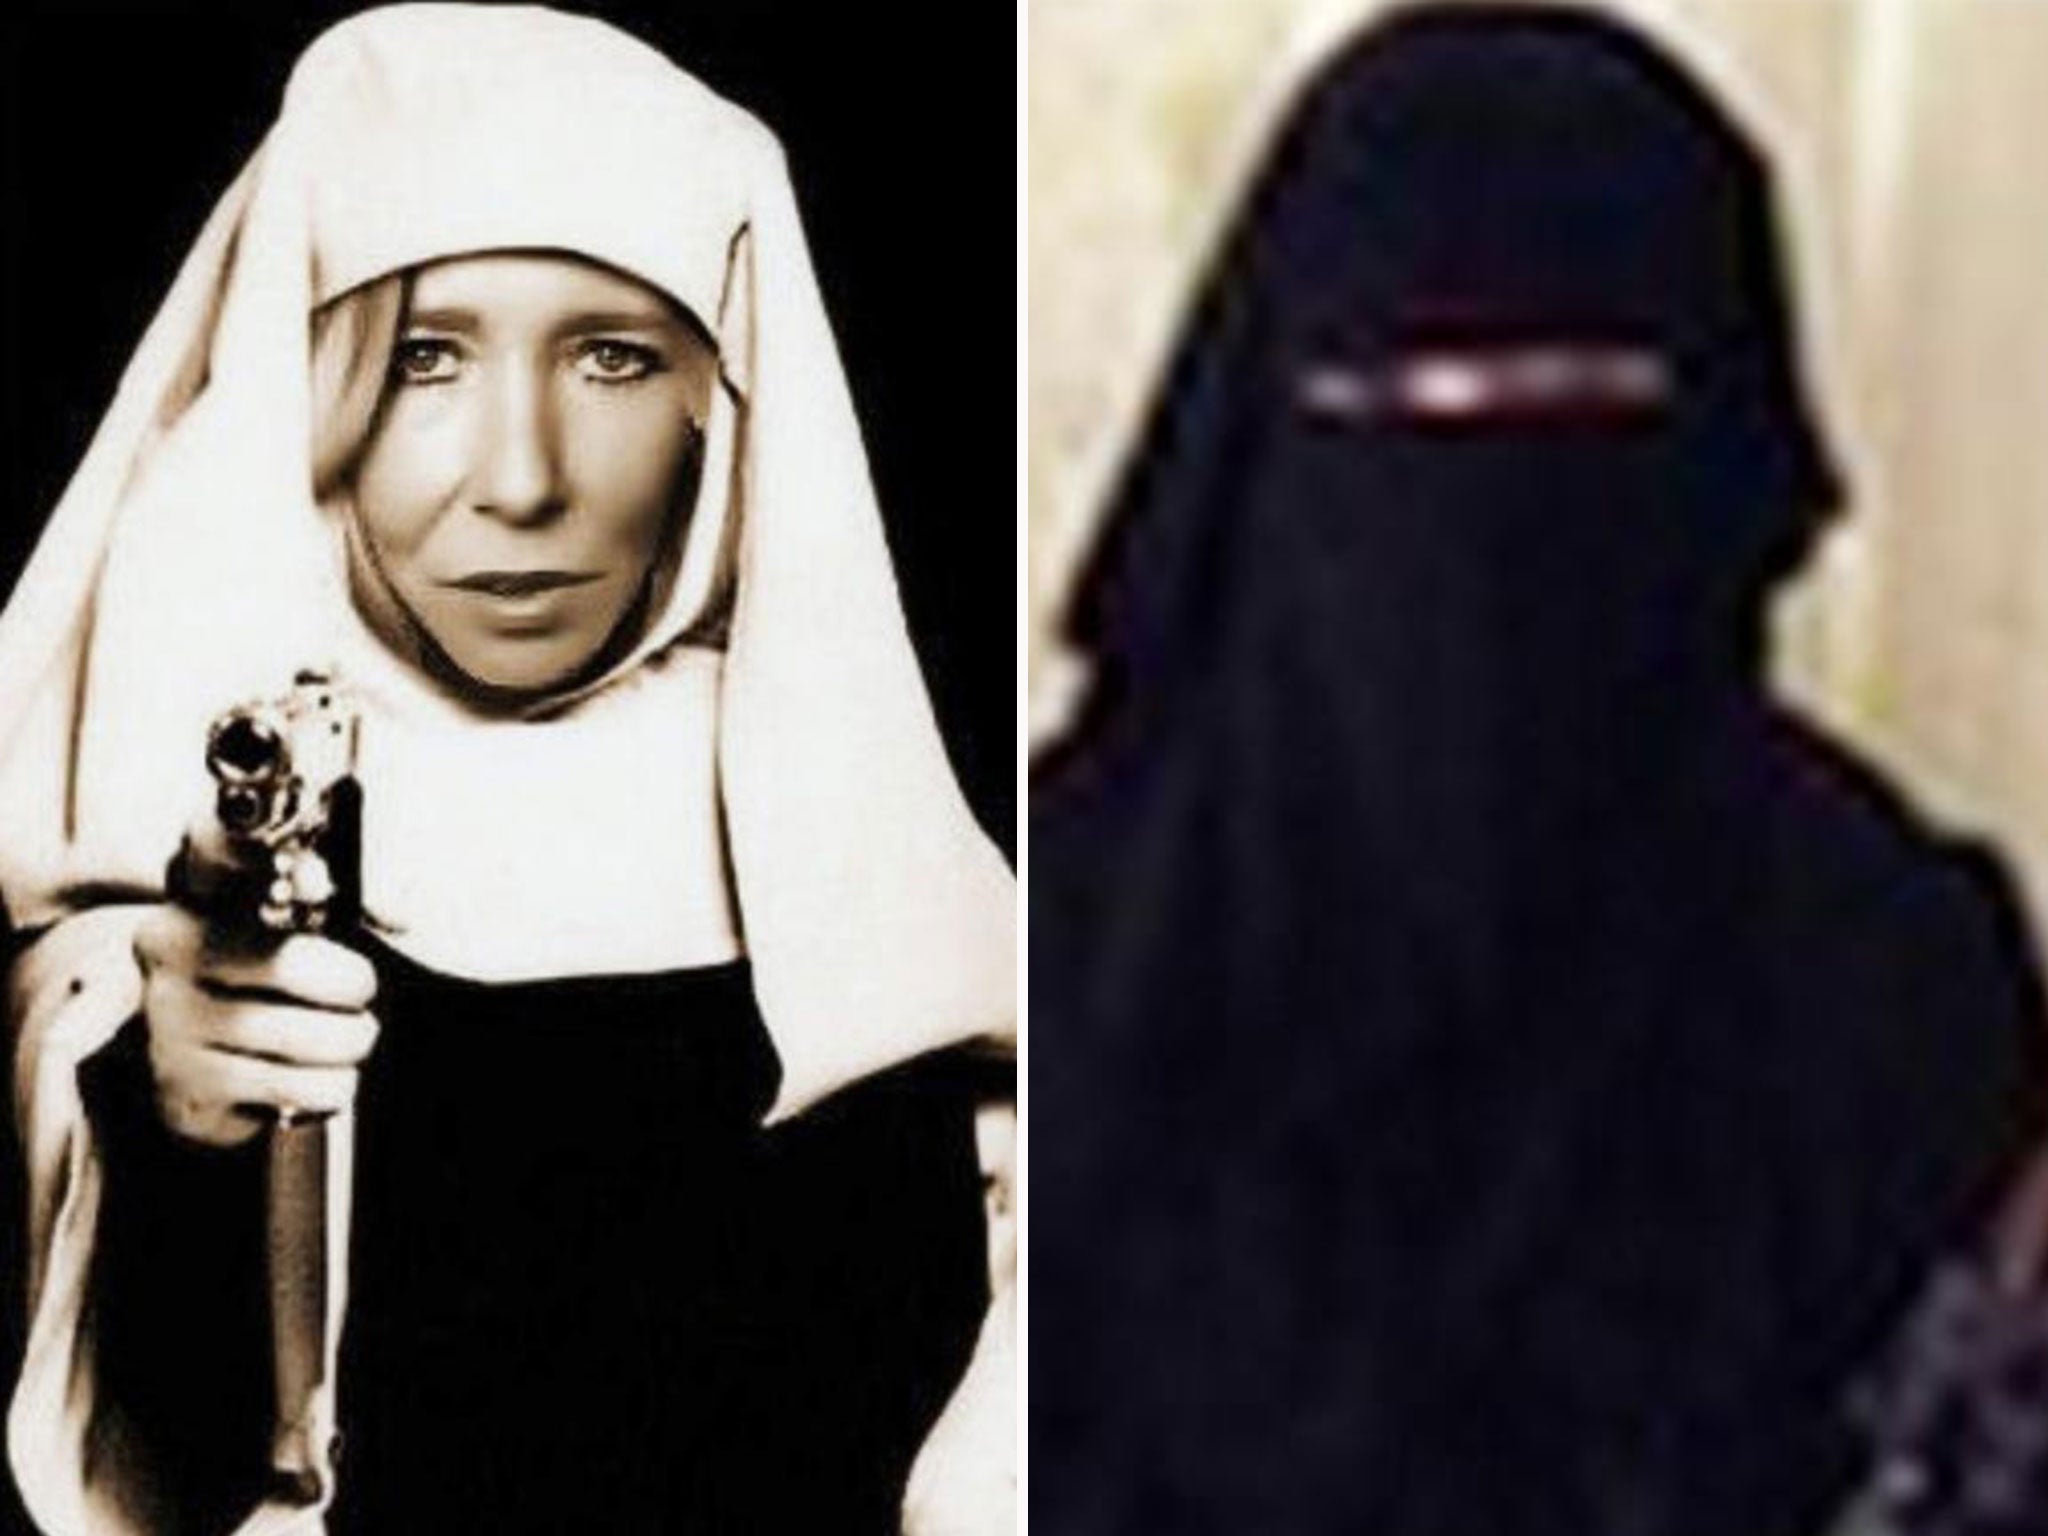 Sally Jones in her Twitter photo as Umm Hussain al-Britani, right, and in a edited photo posted online